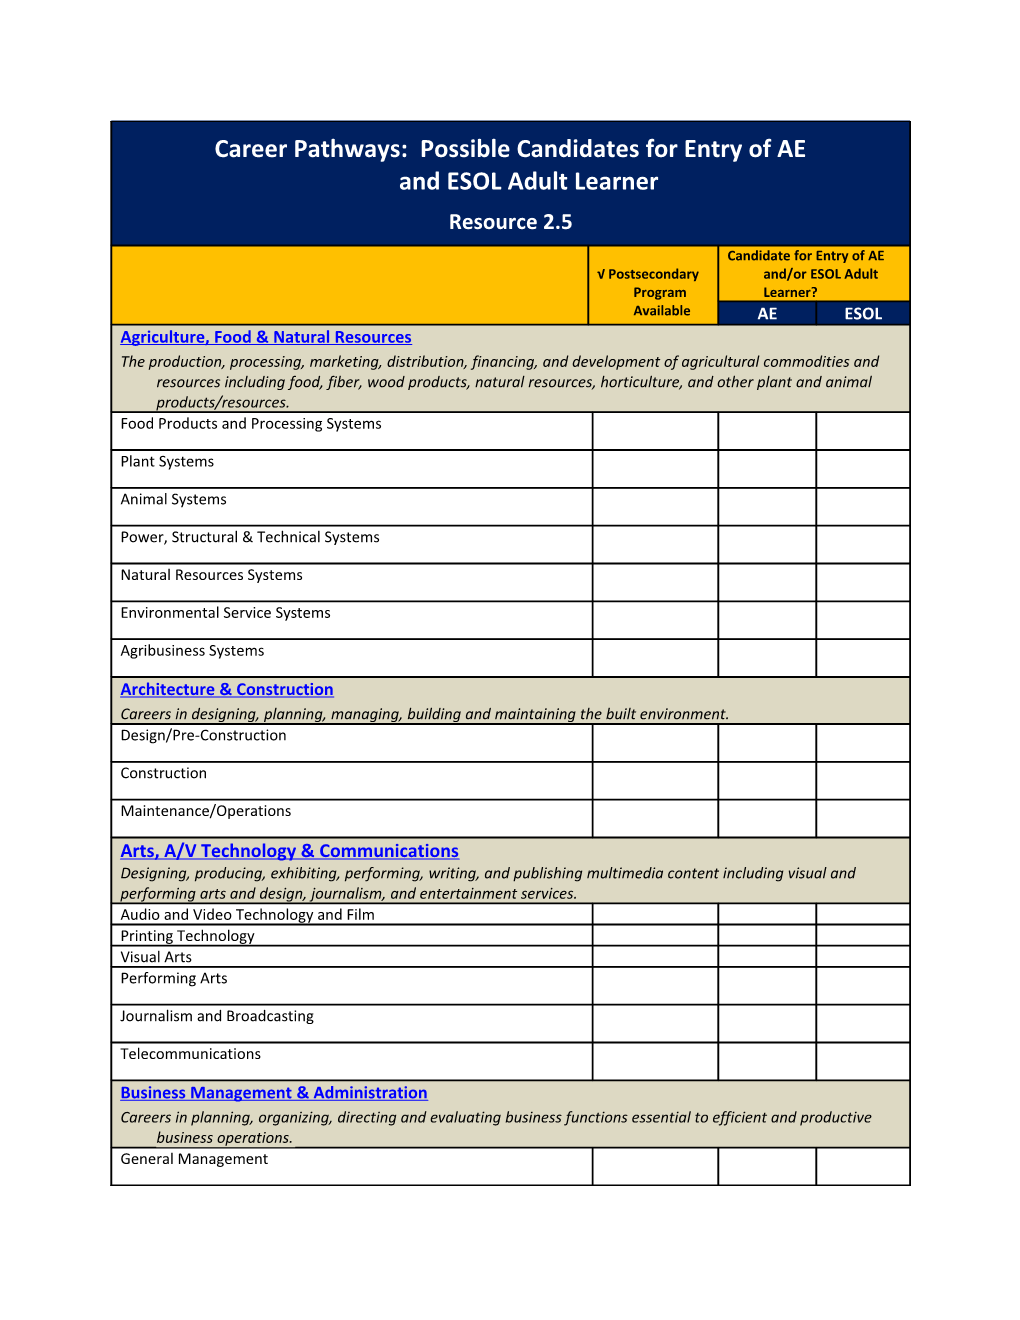 Career Pathways: Possible Candidates for Entry of Aeandesoladult Learner